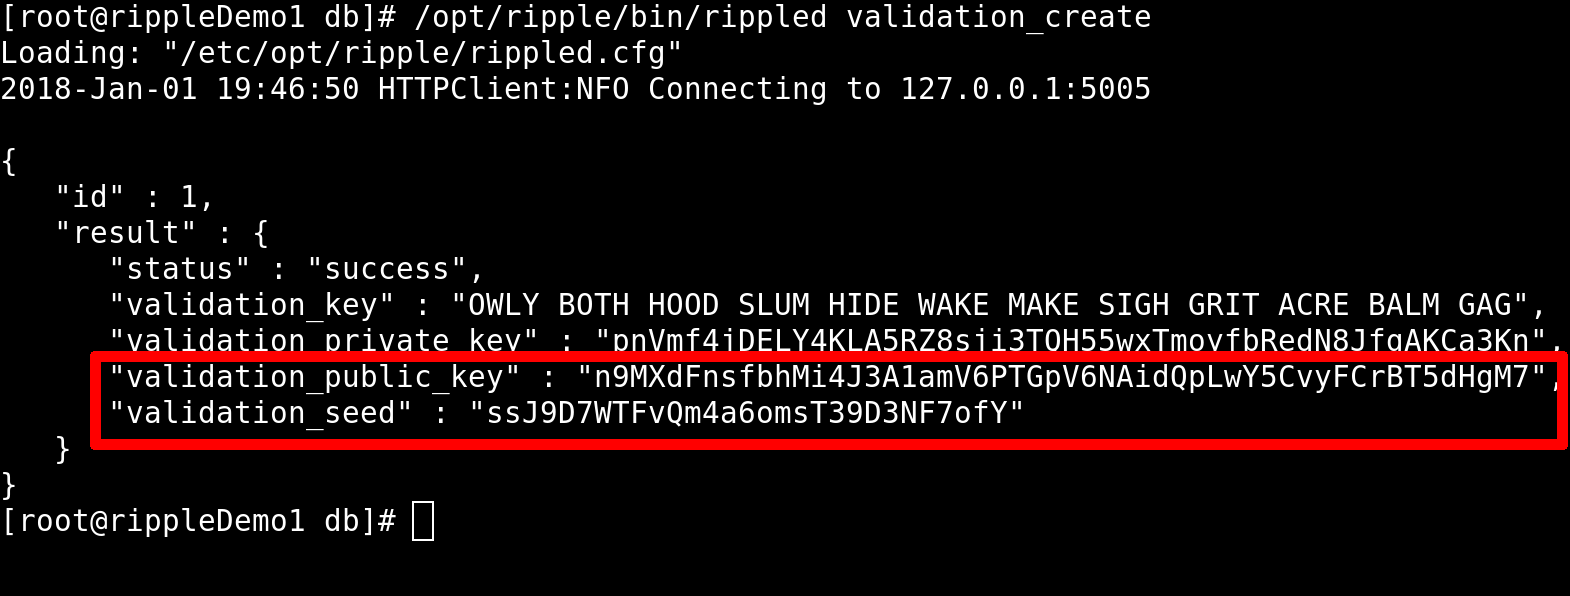 Output from the validation_create command.